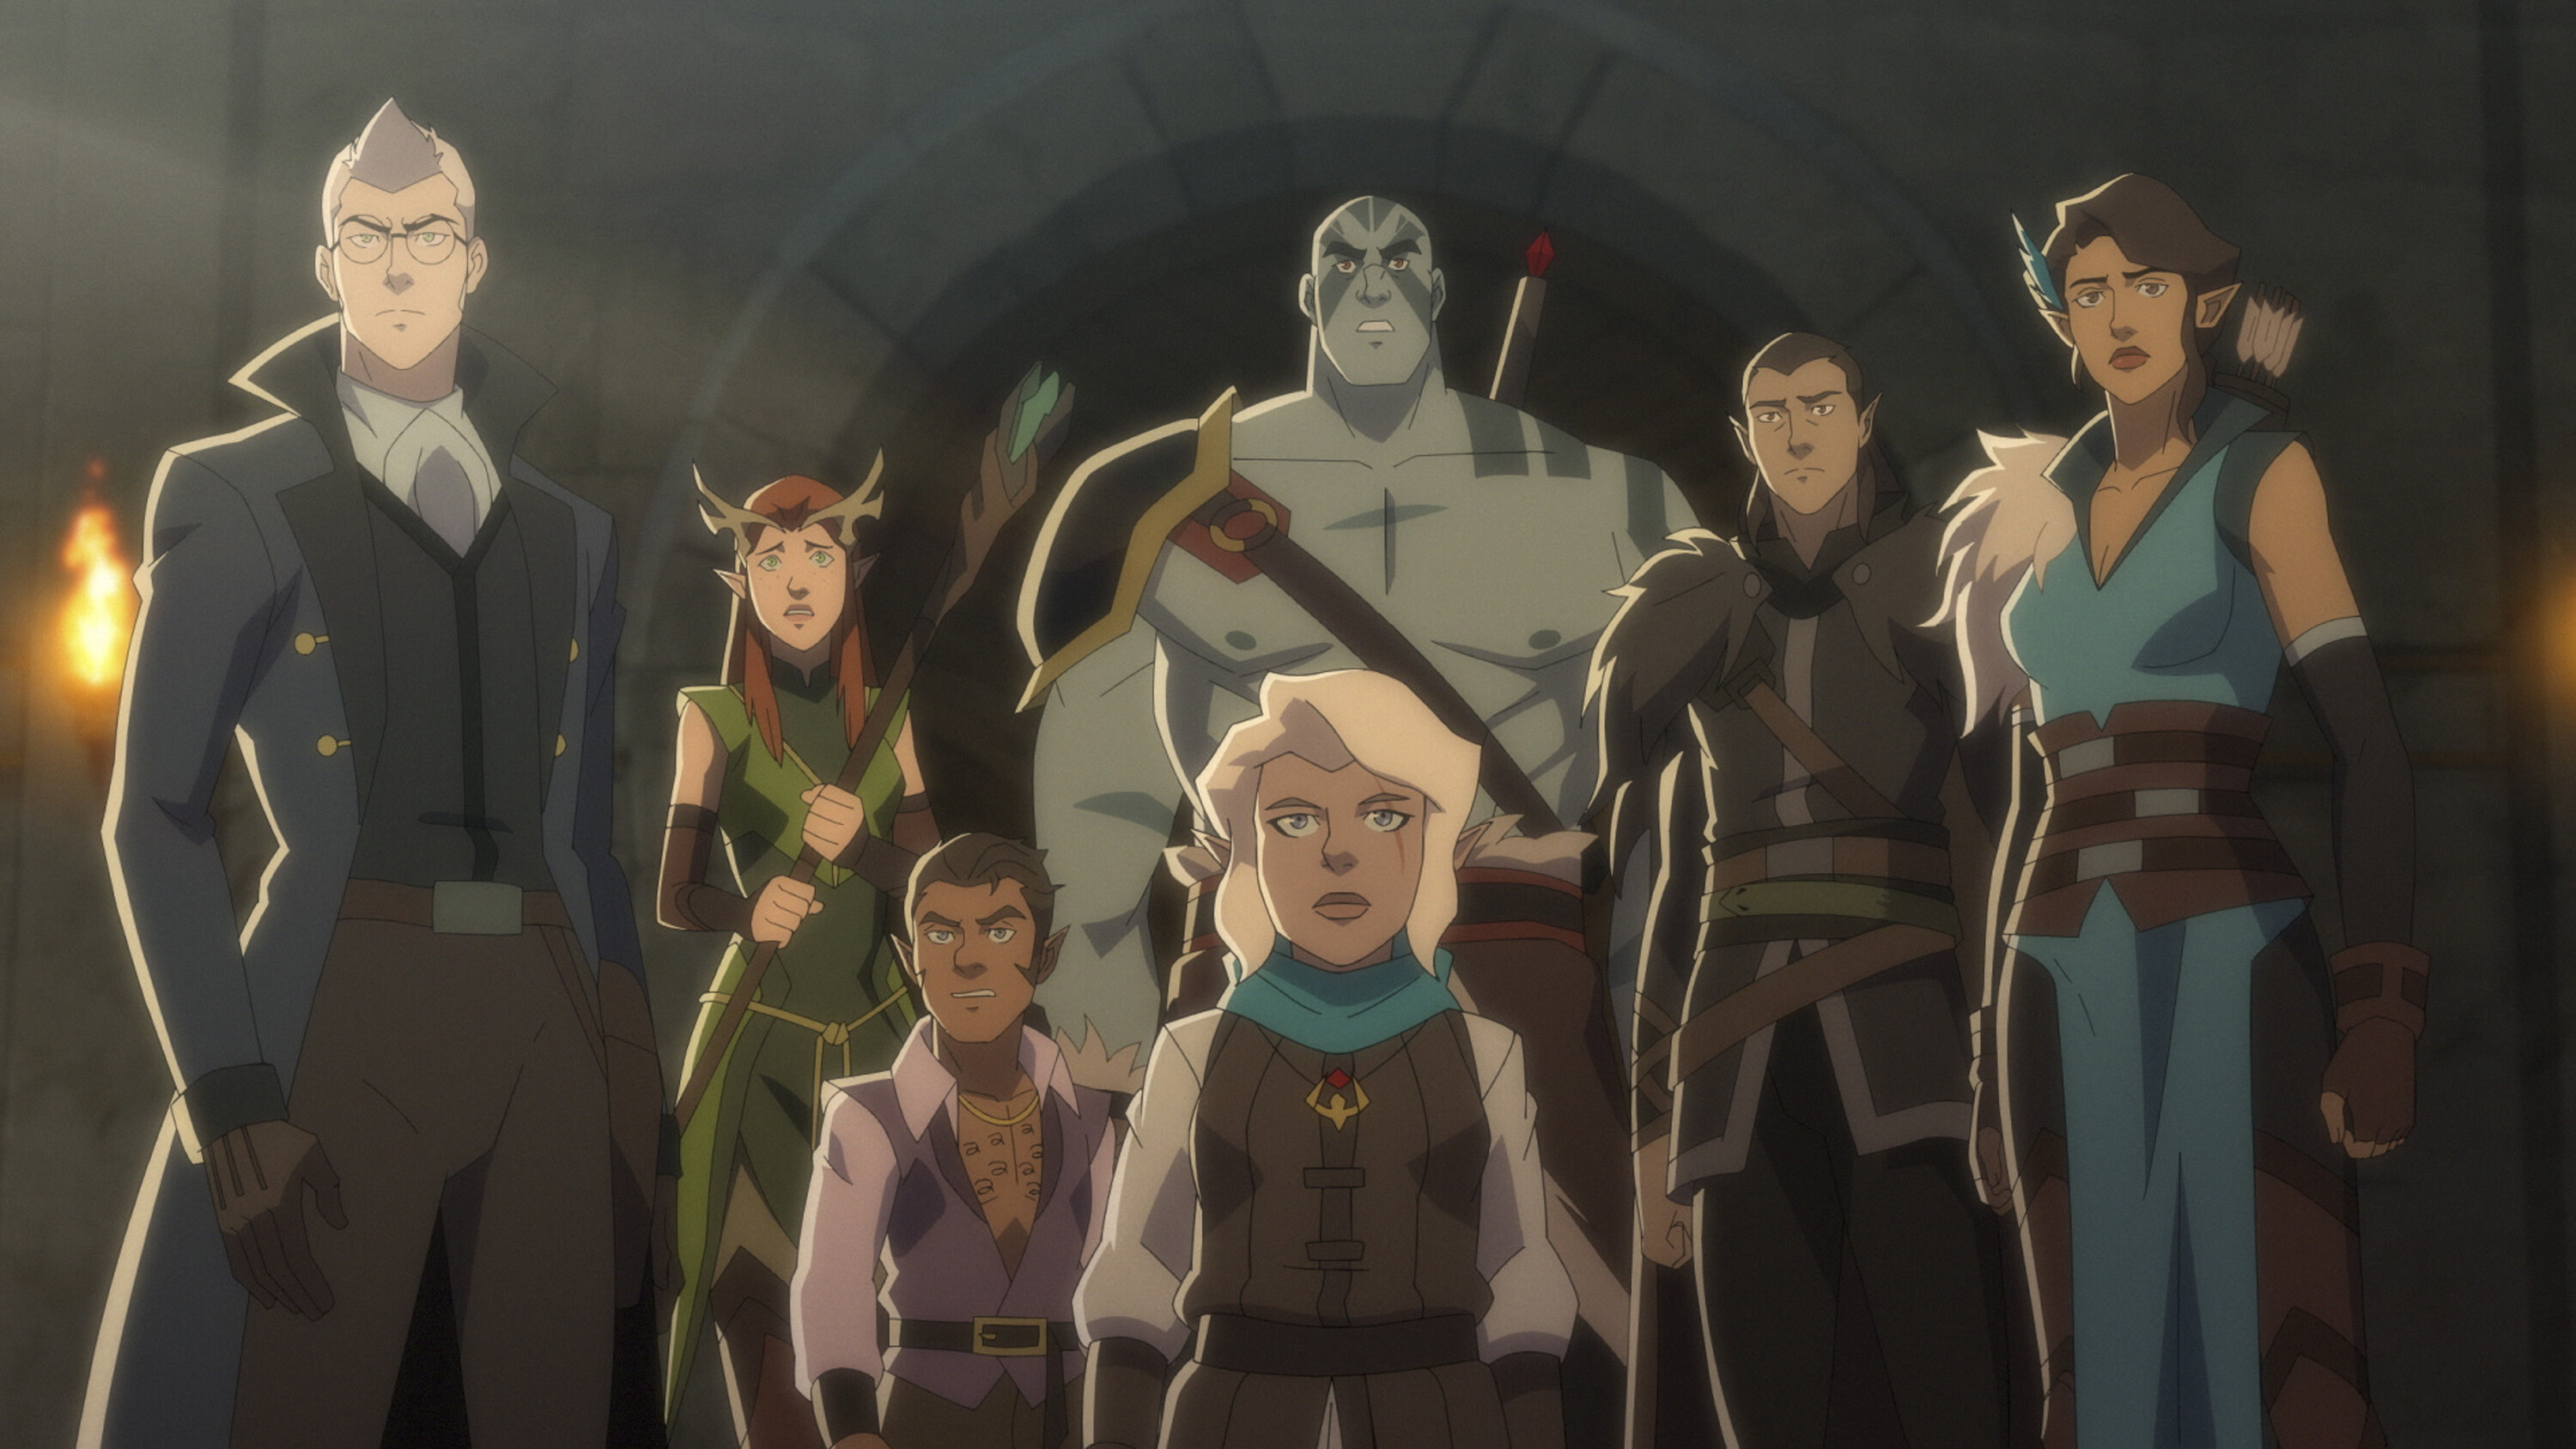 Category:The Legend of Vox Machina, Critical Role Wiki